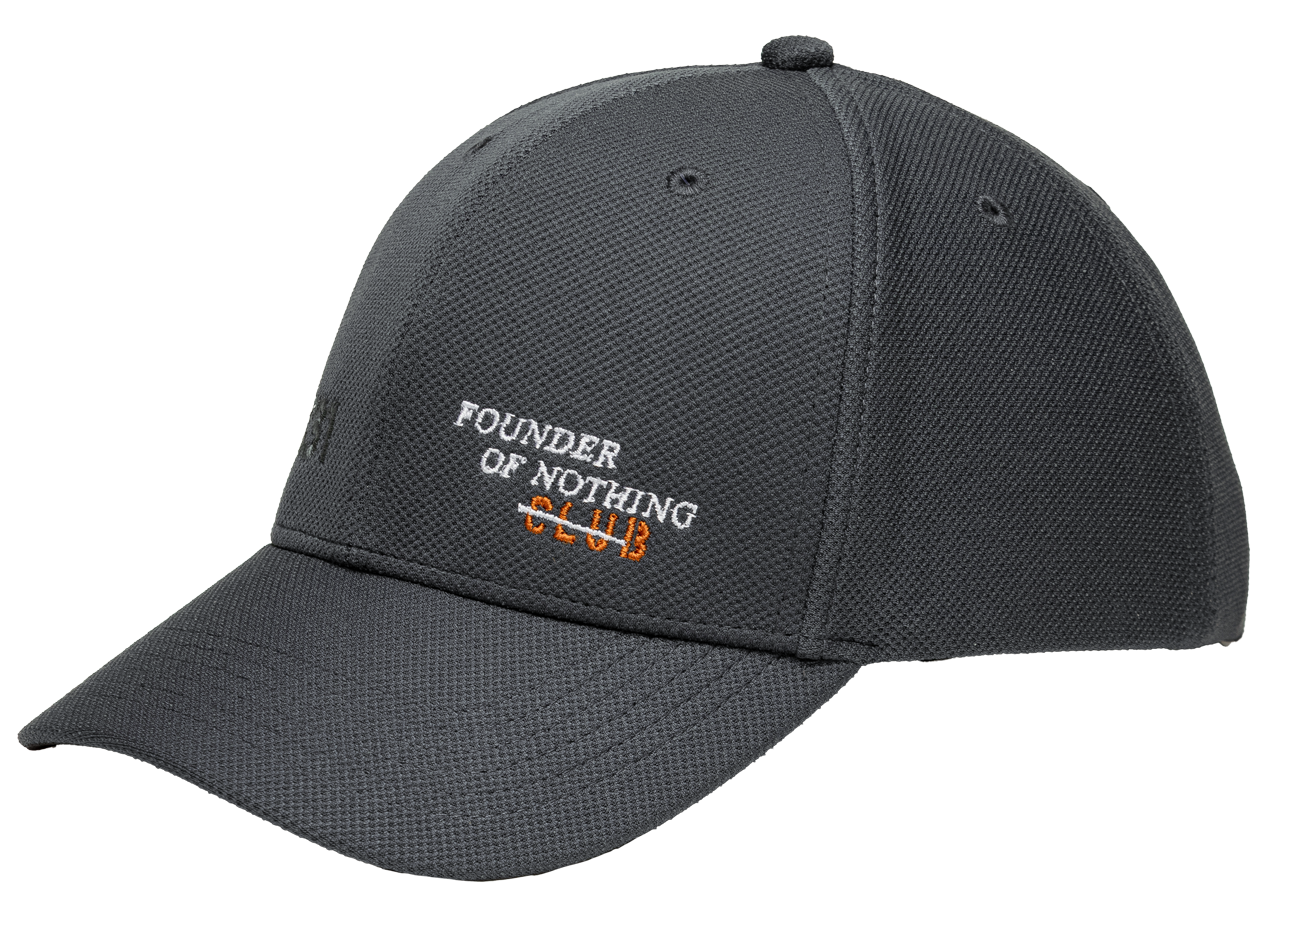 Founder of Nothing Club / Graphite Hat